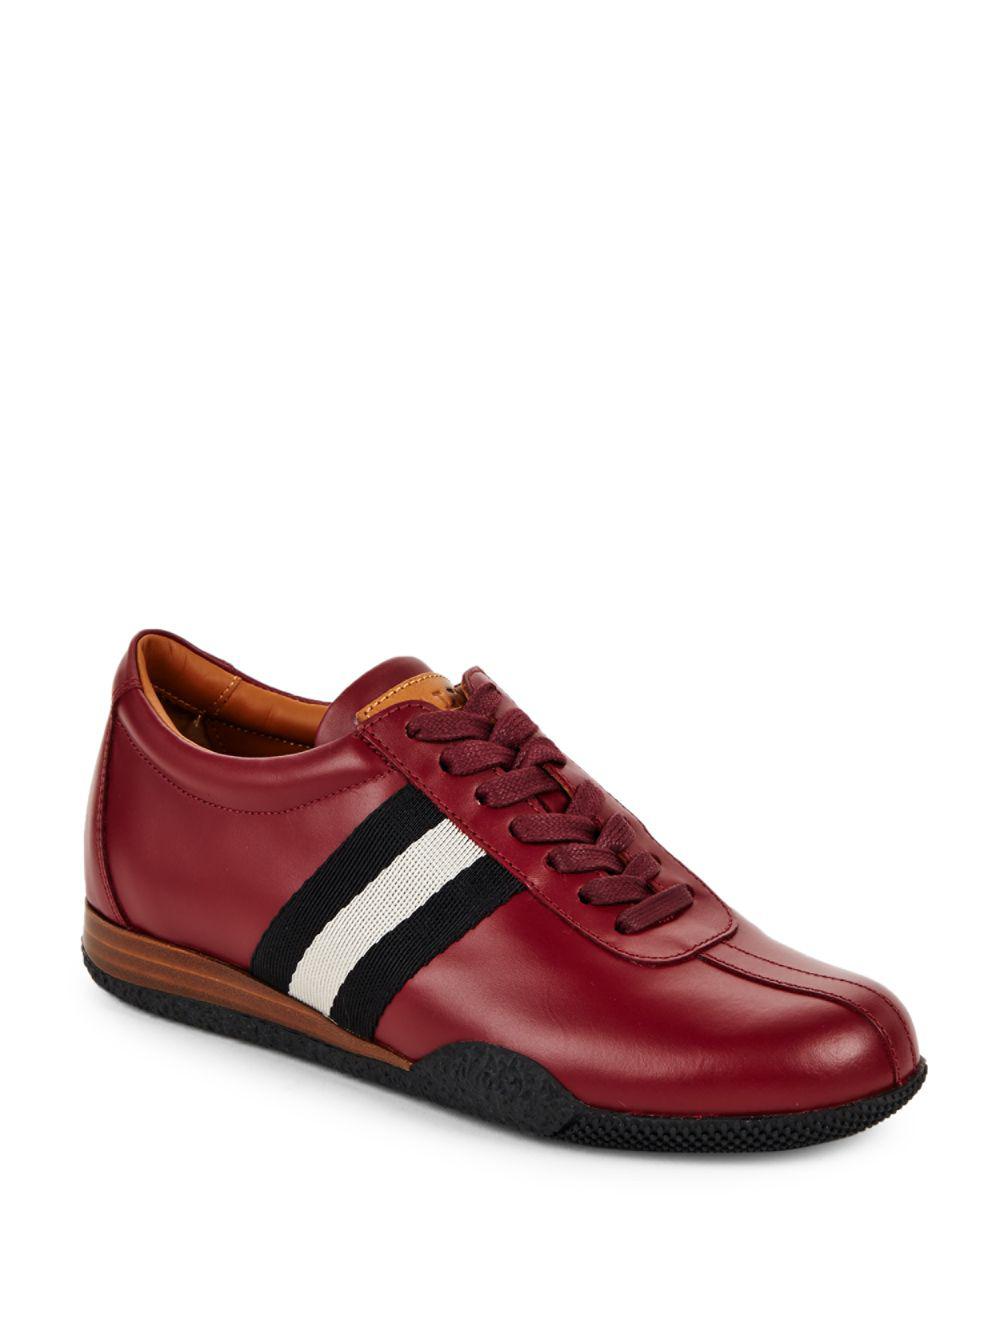 Bally Leather Round Toe Striped Sneakers in Red for Men - Lyst